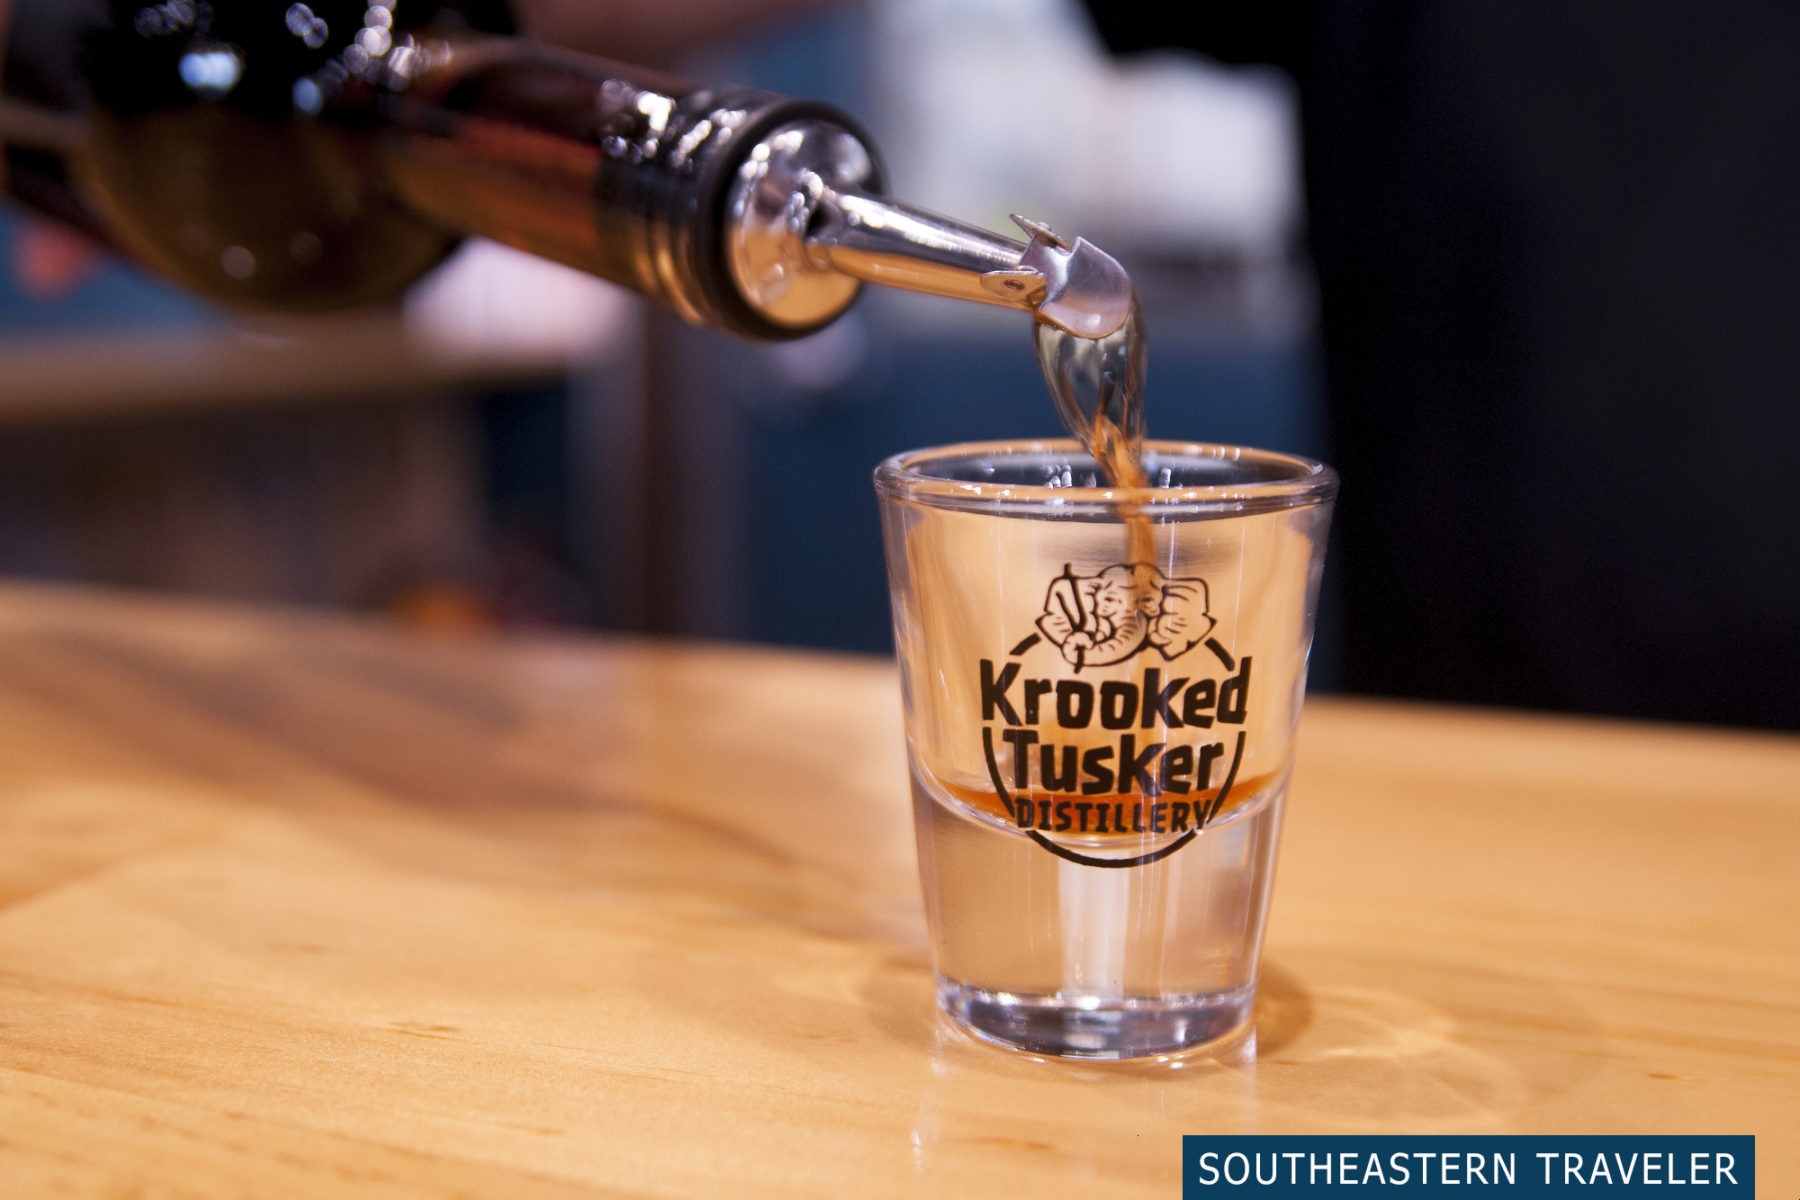 Pouring a shot glass of whiskey at the Krooked Tusker Distillery in Hammondsport, New York